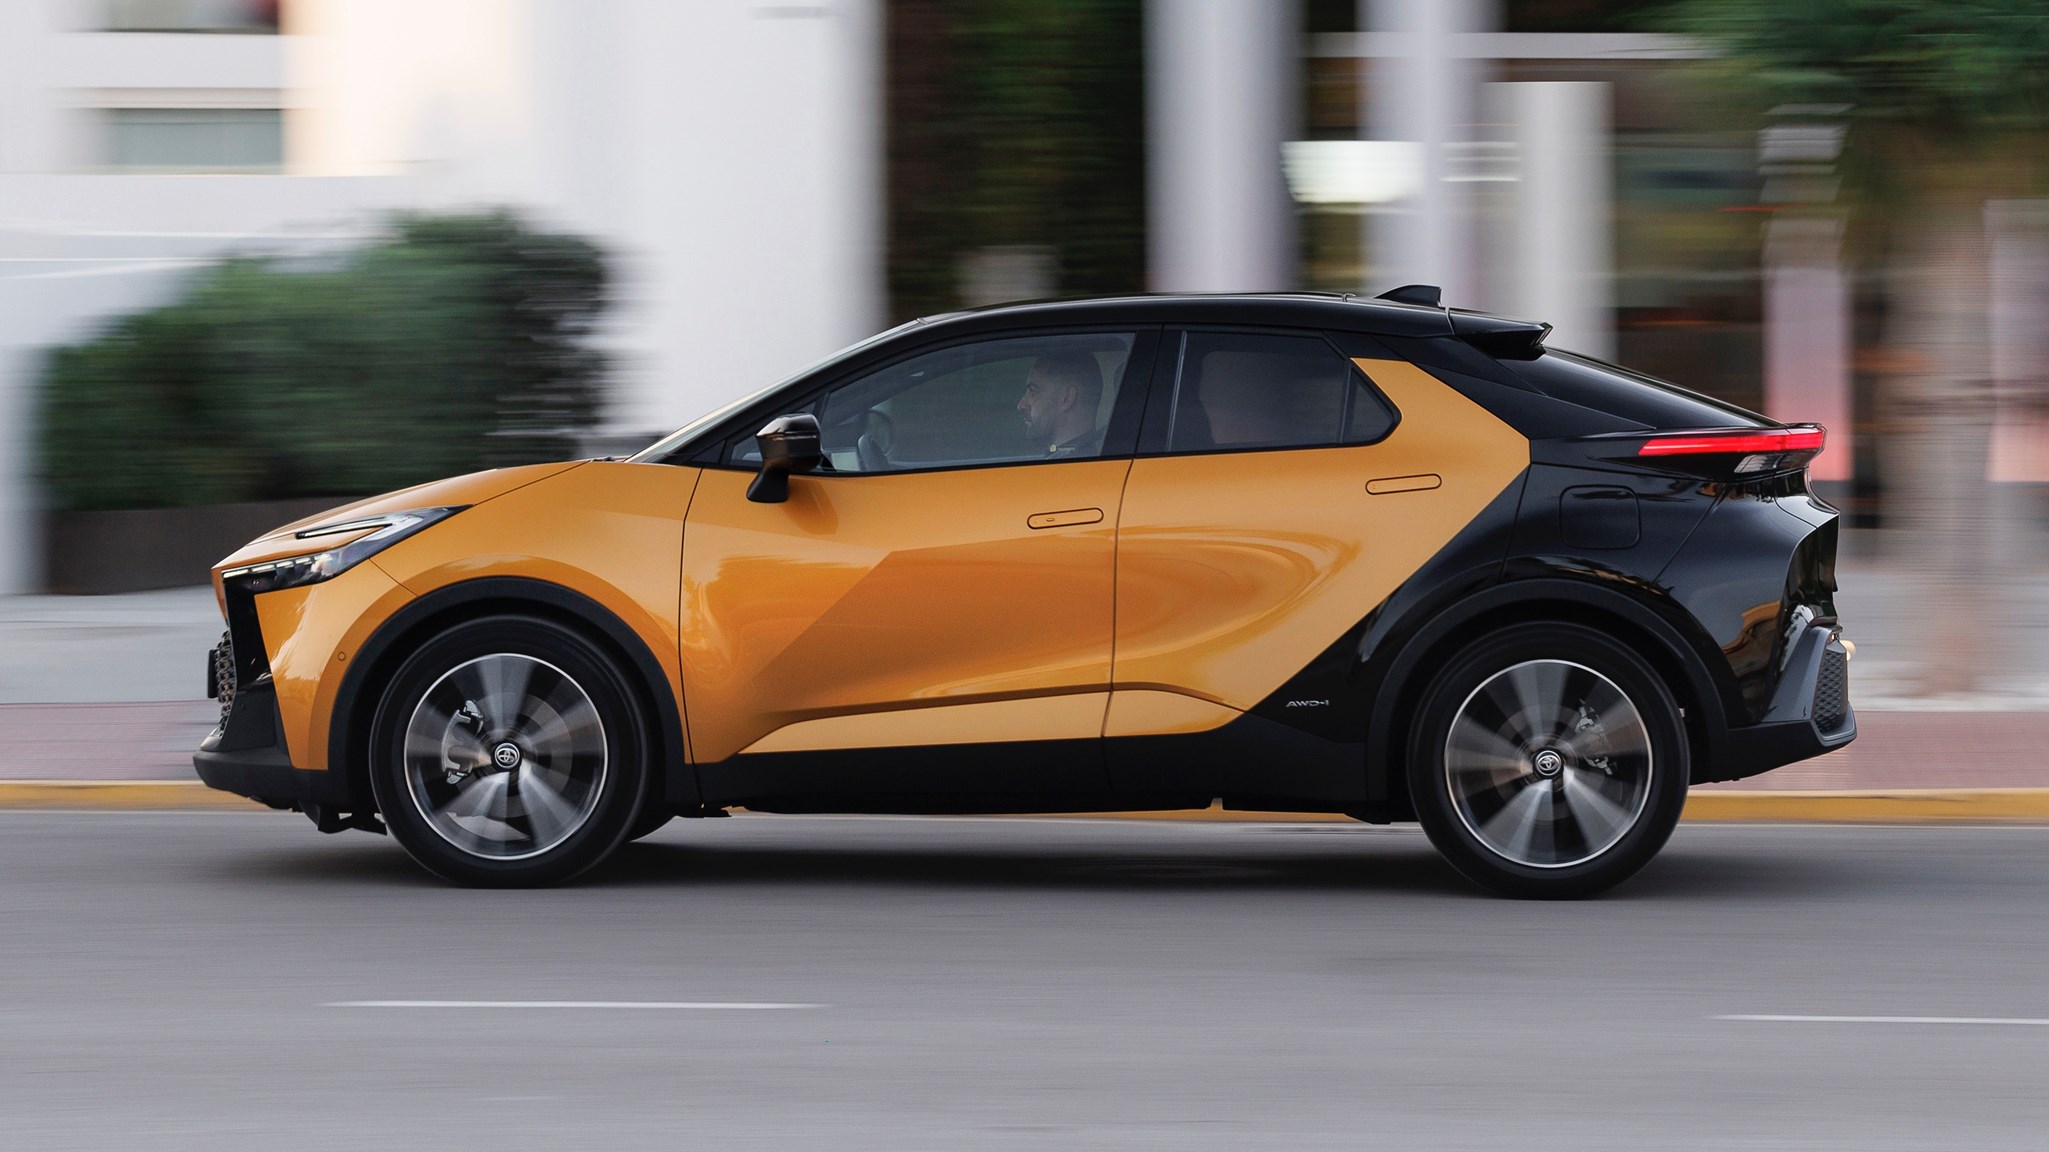 Toyota C-HR review  Should you upgrade to the more powerful hybrid  version? 